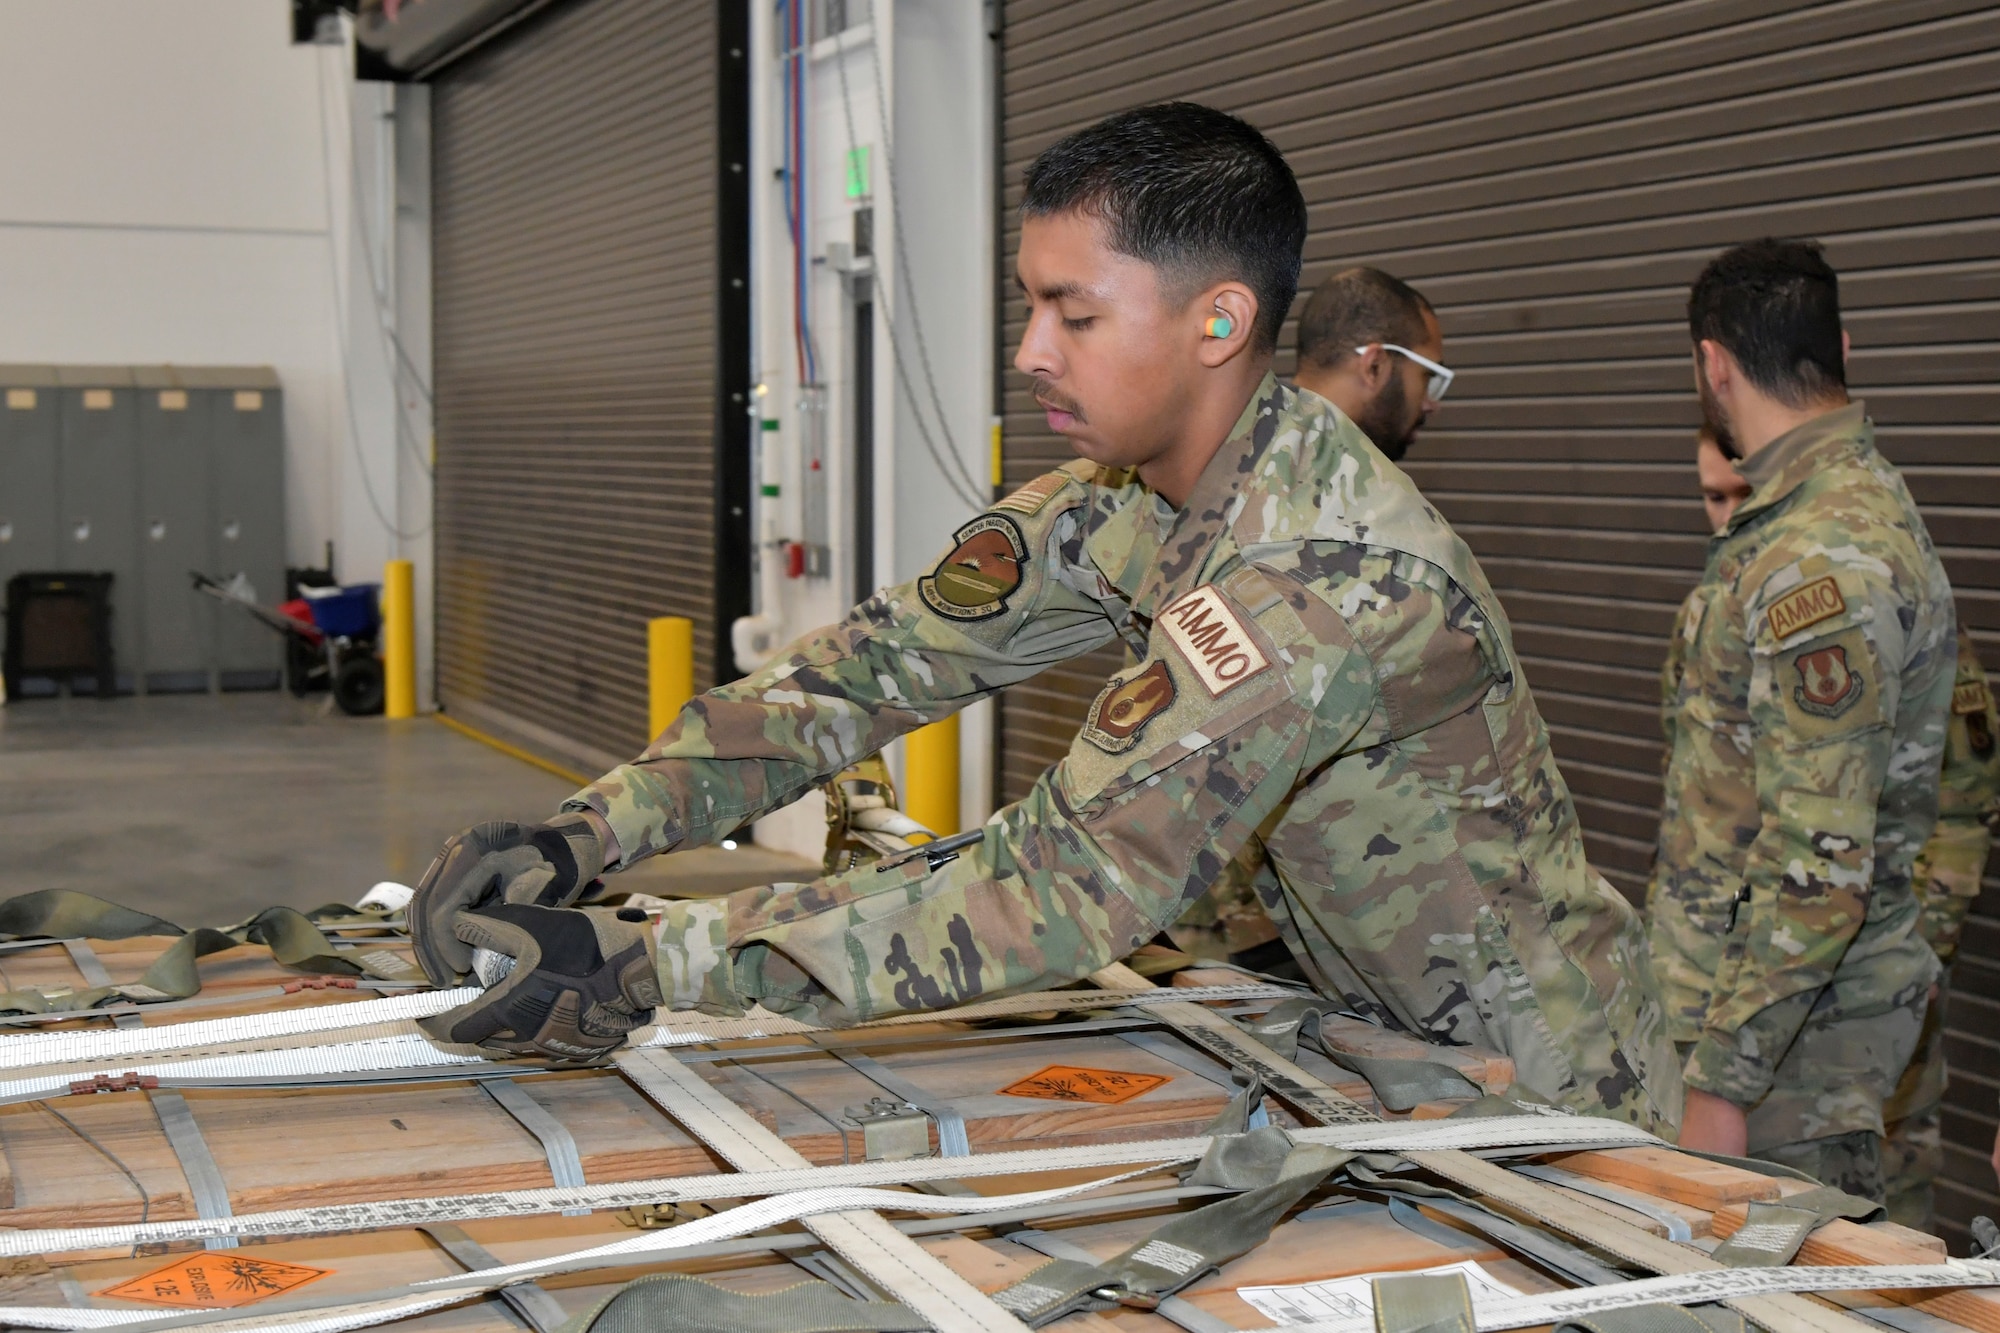 An Airman secures cargo netting on a pallet load